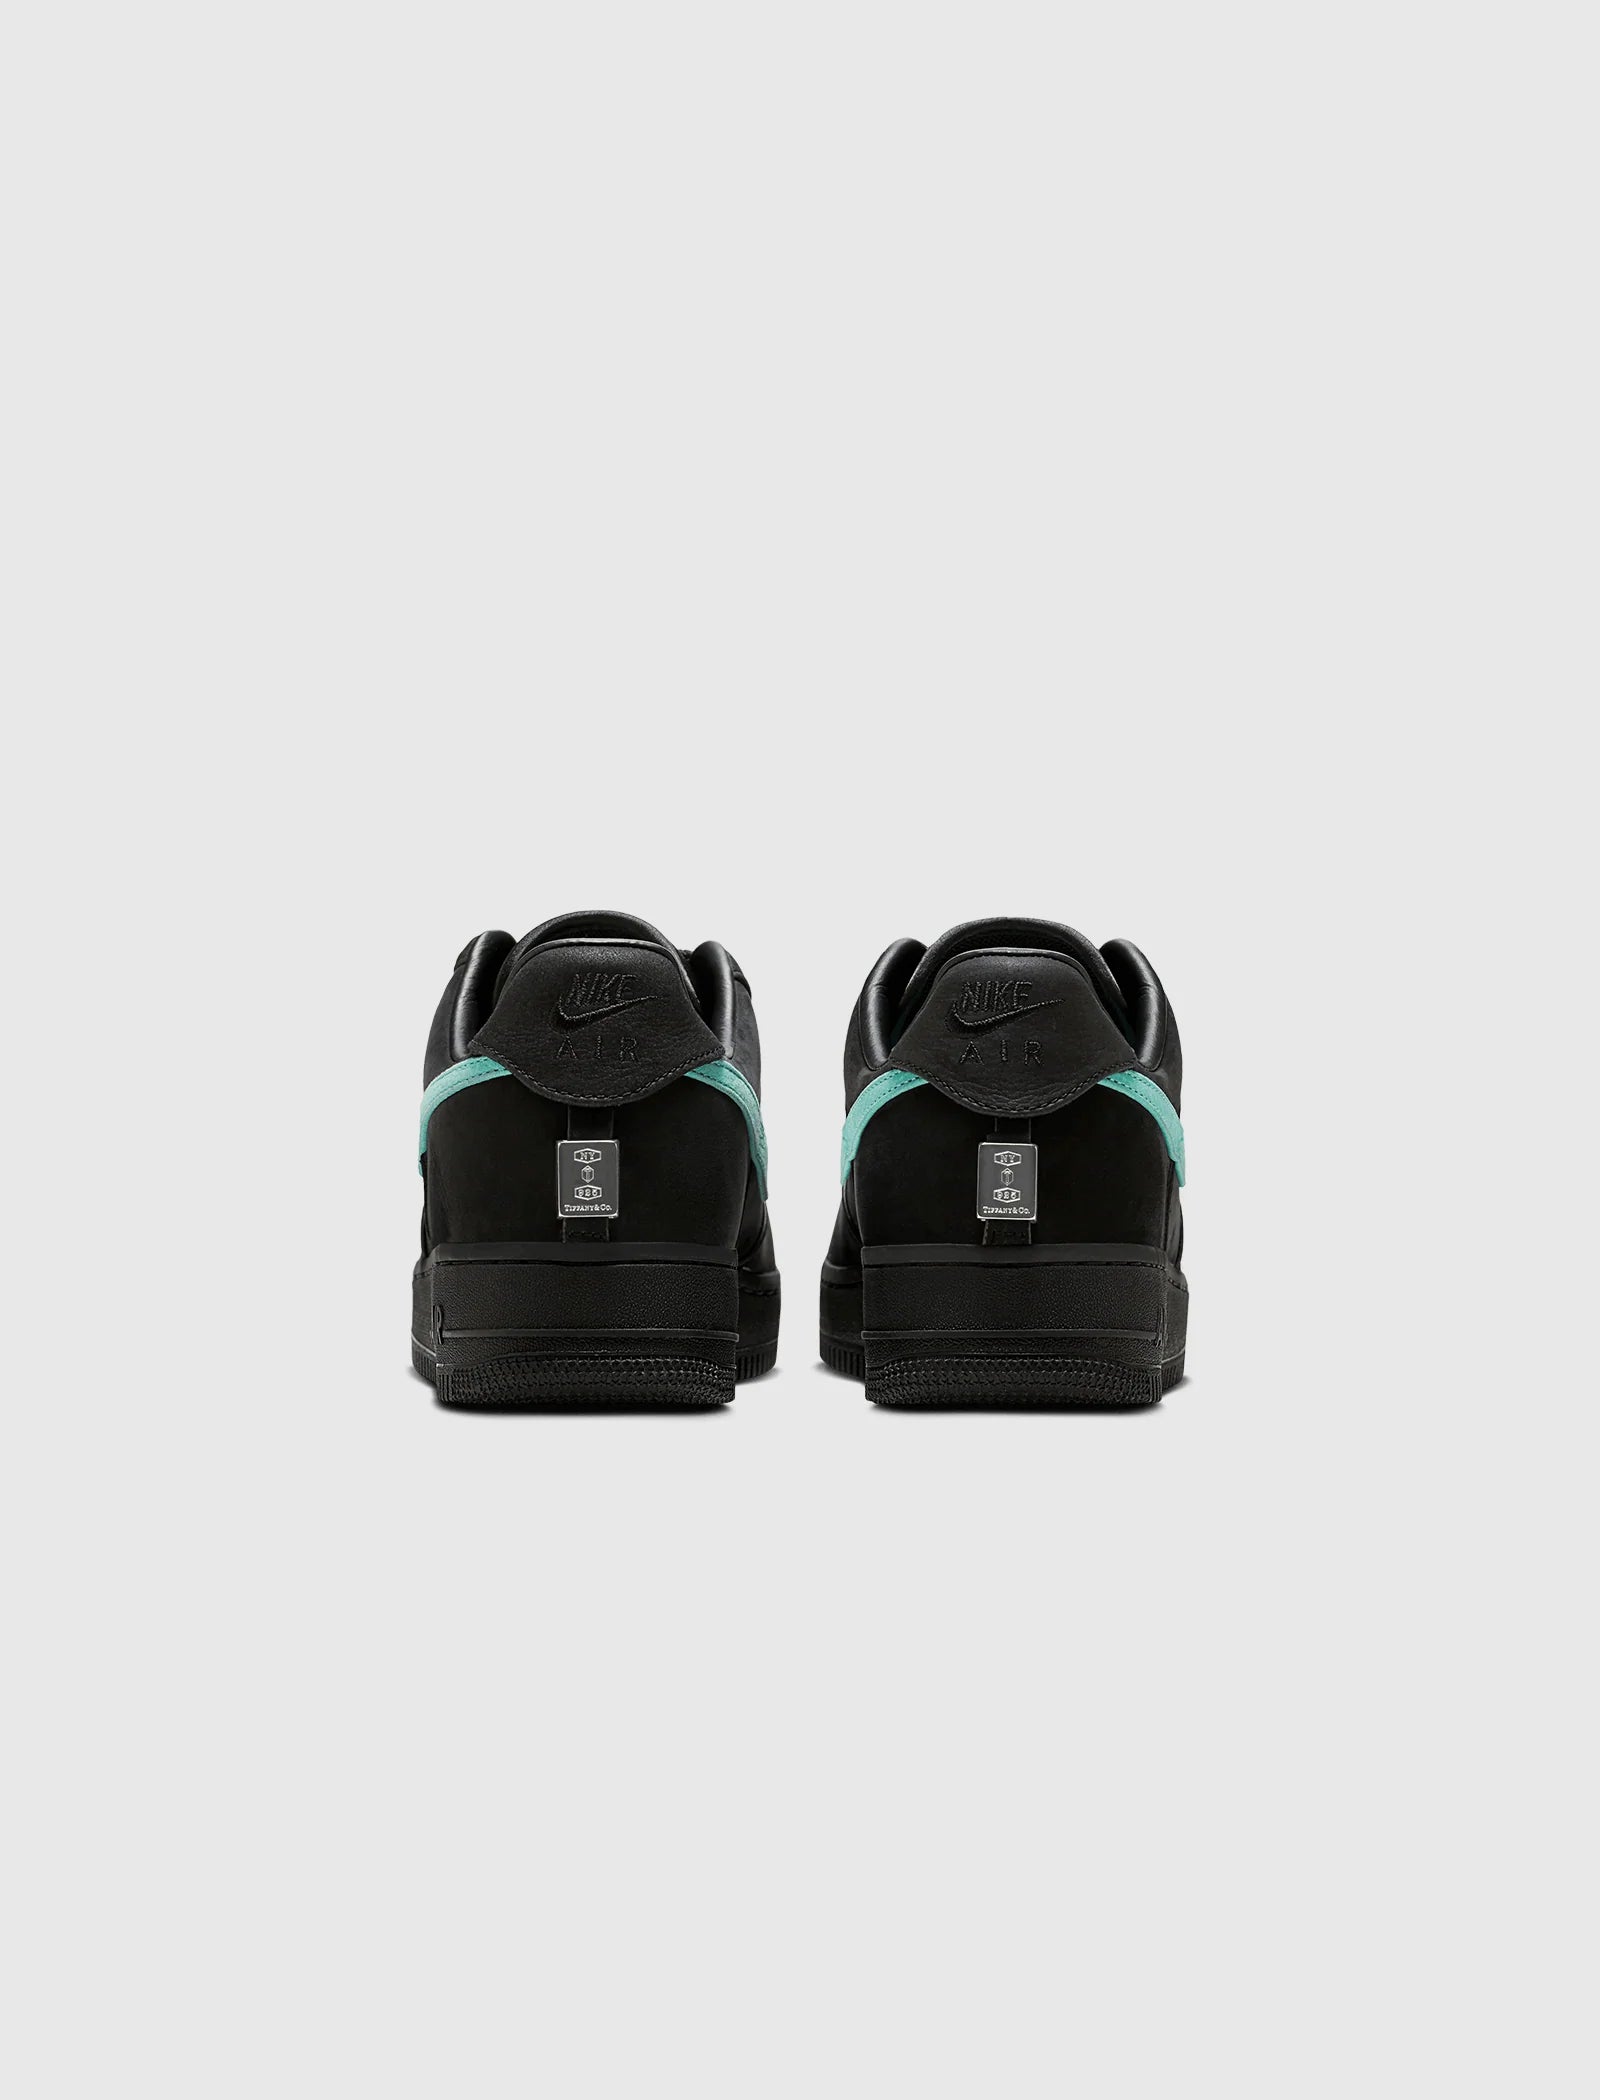 TIFFANY & CO. AIR FORCE 1 LOW "1837"